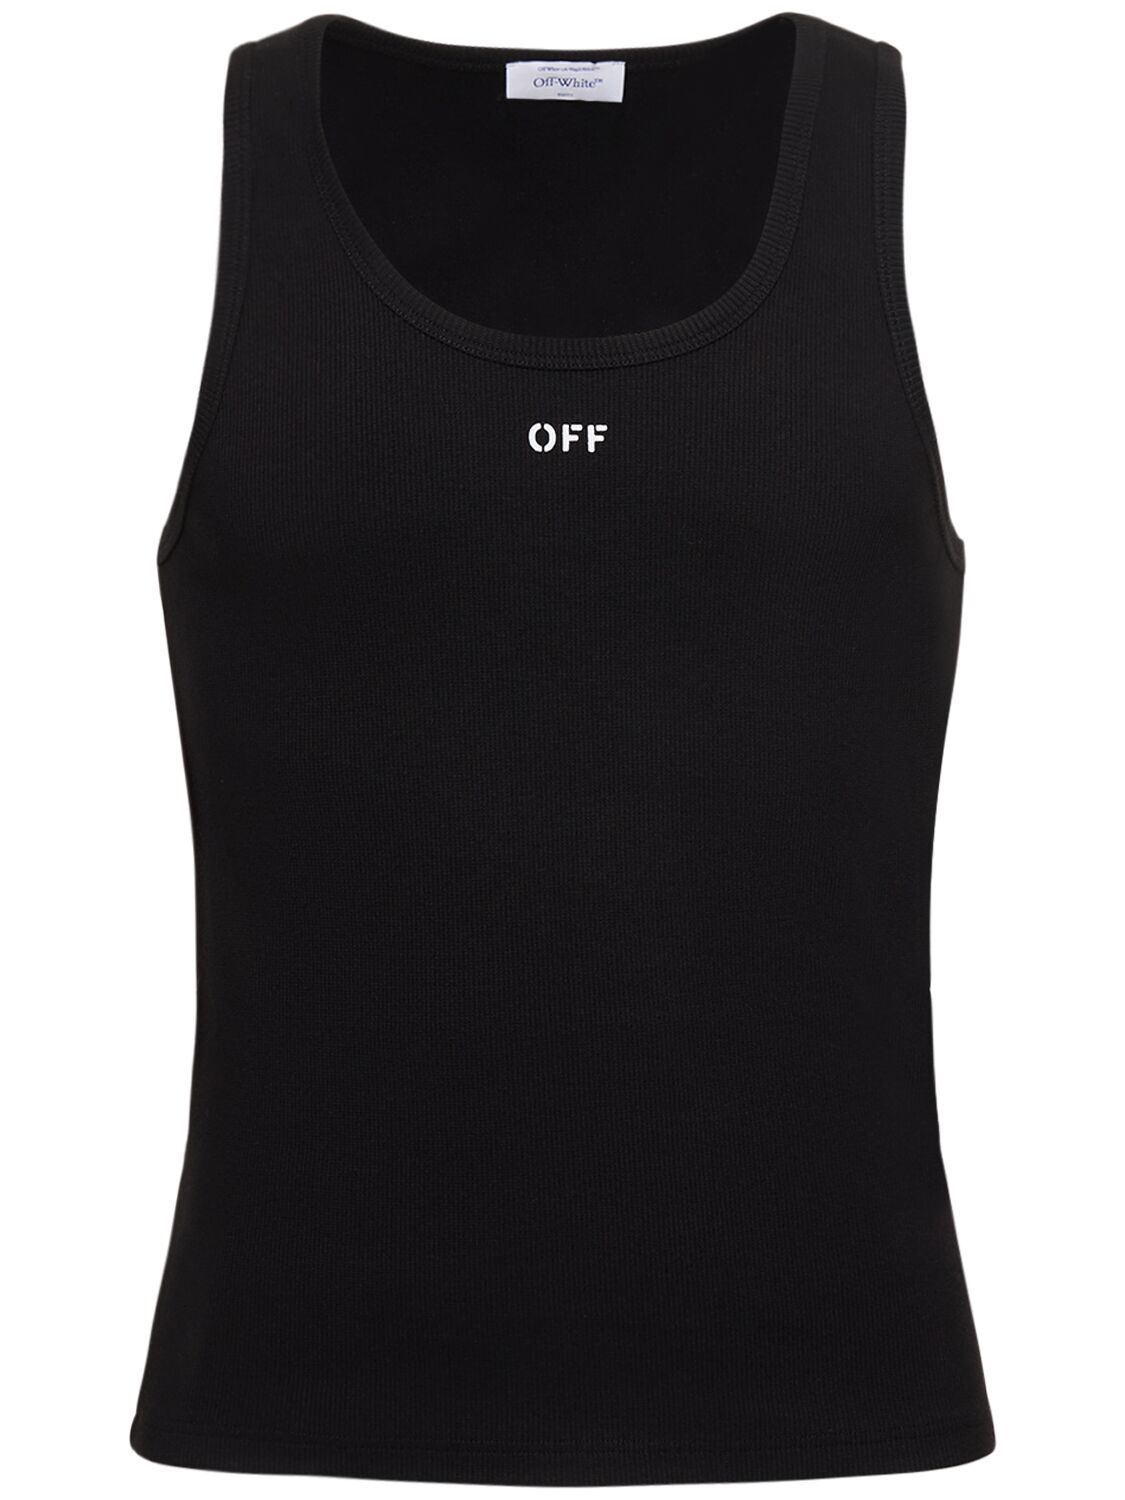 Image of Off Stamp Cotton Blend Tank Top